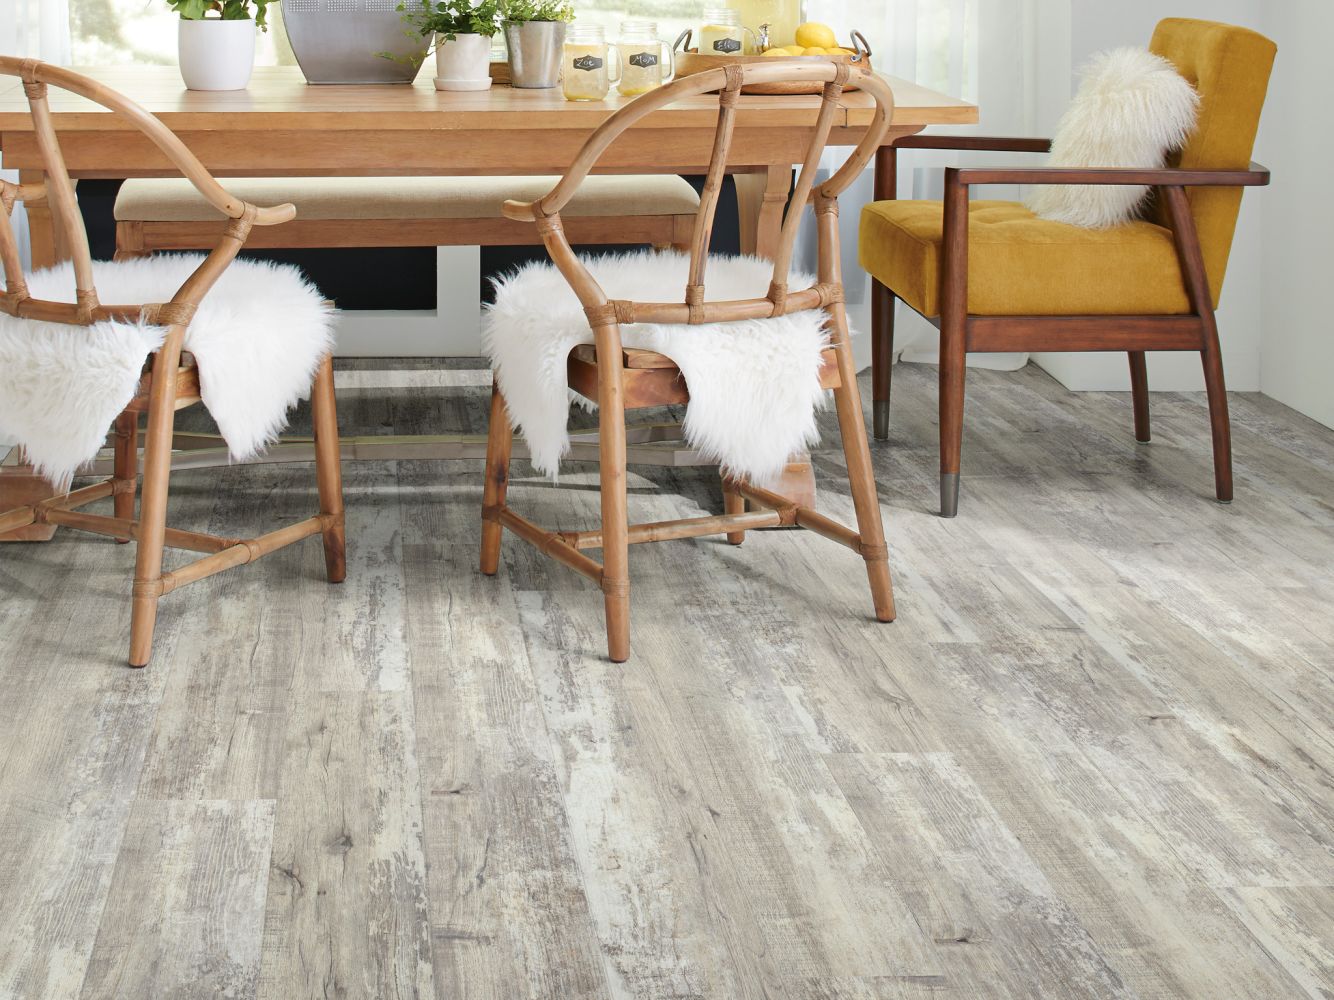 Shaw Floors Resilient Residential Paramount 512c Plus Ivory Oak 00138_509SA